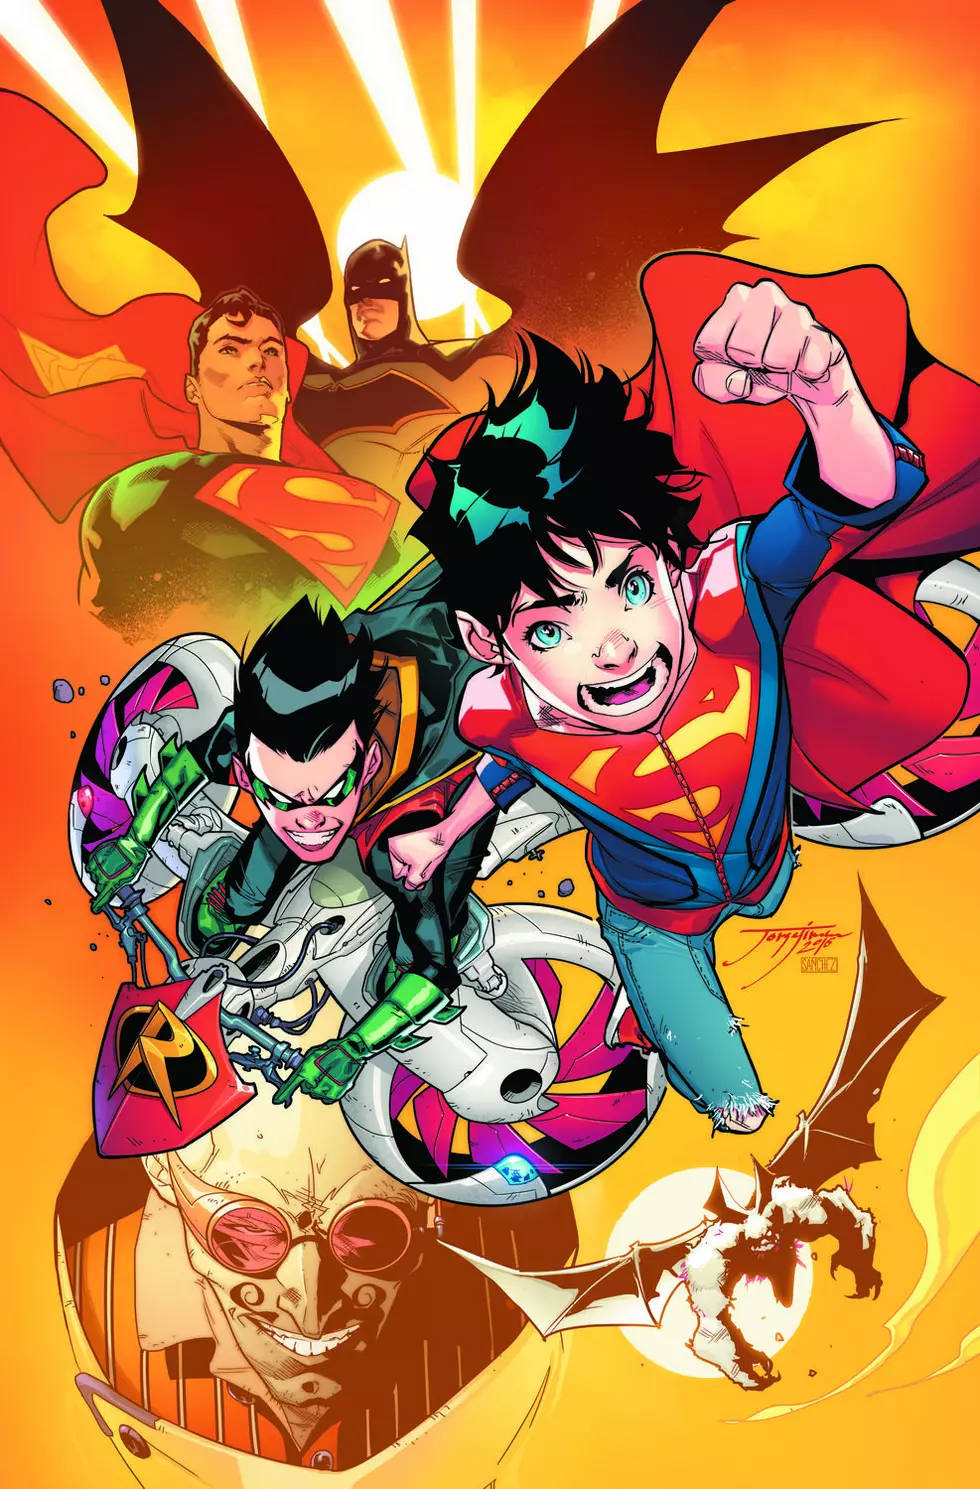 Peter J. Tomasi And Jorge Jimenez Confirmed For February&#8217;s &#8216;Super Sons&#8217; [NYCC 2016]